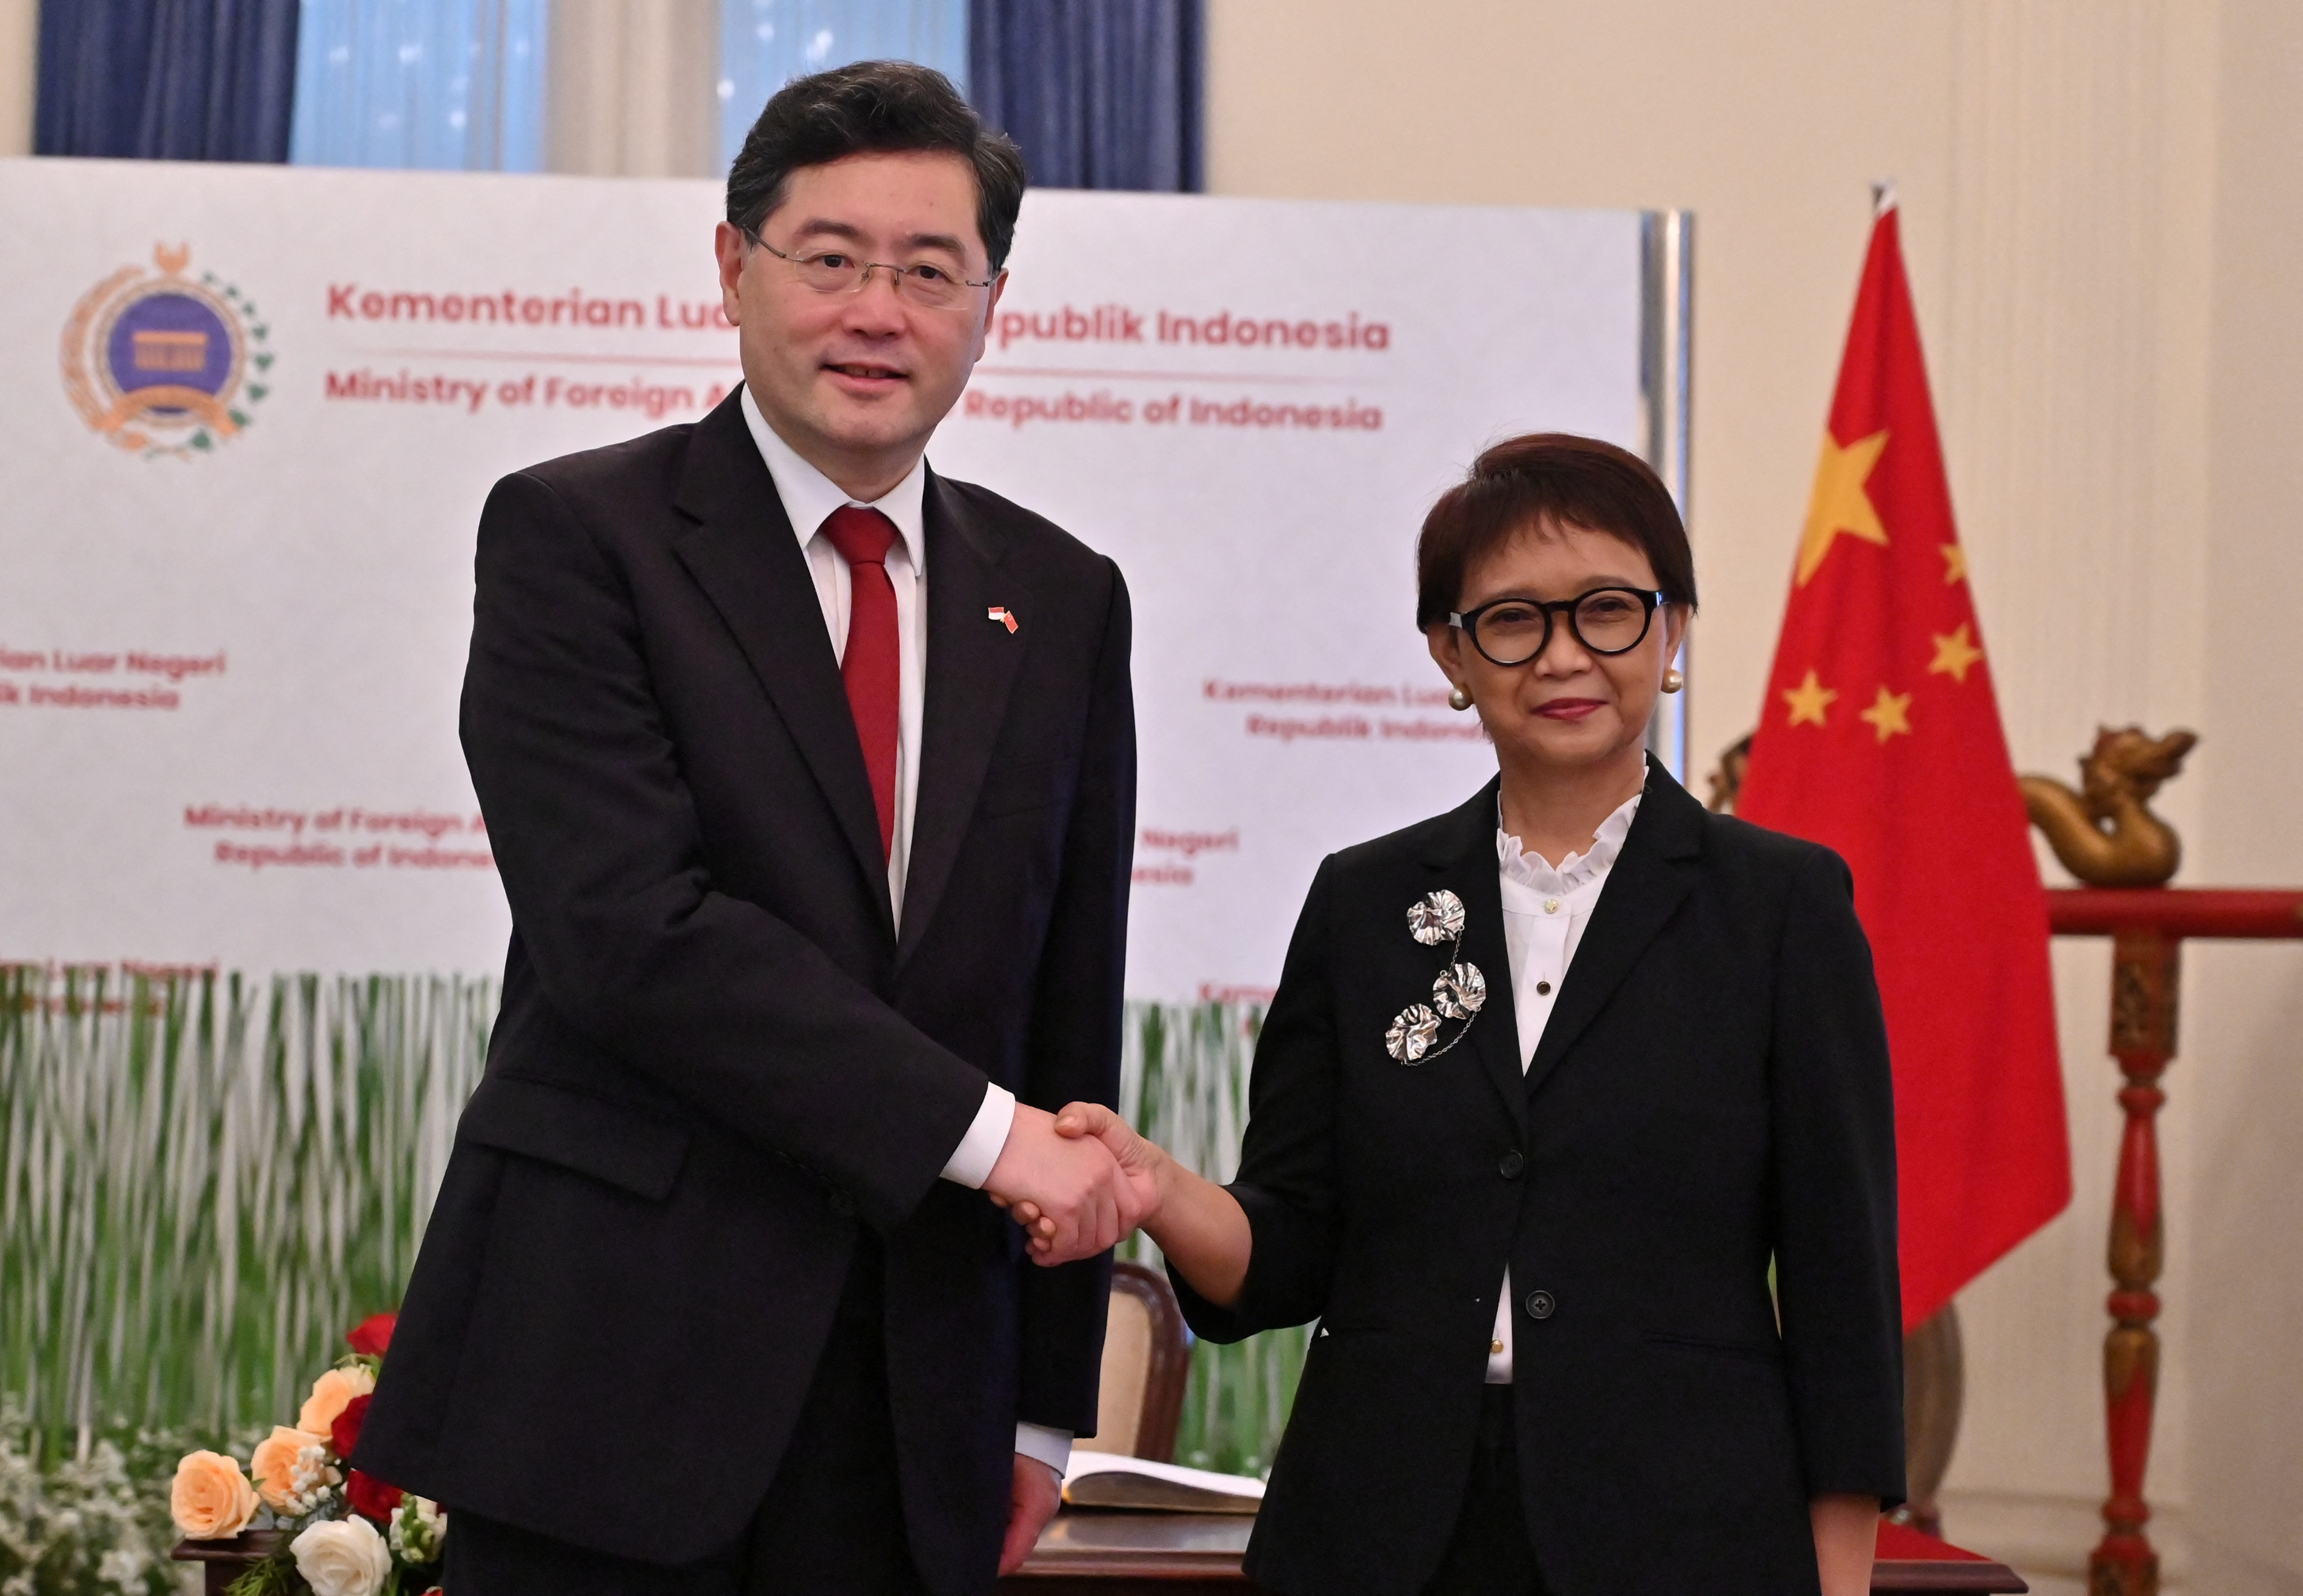 Chinese Foreign Minister Qin Gang shake hands with Indonesian Foreign Minister Retno Marsudi during the photo session in Jakarta